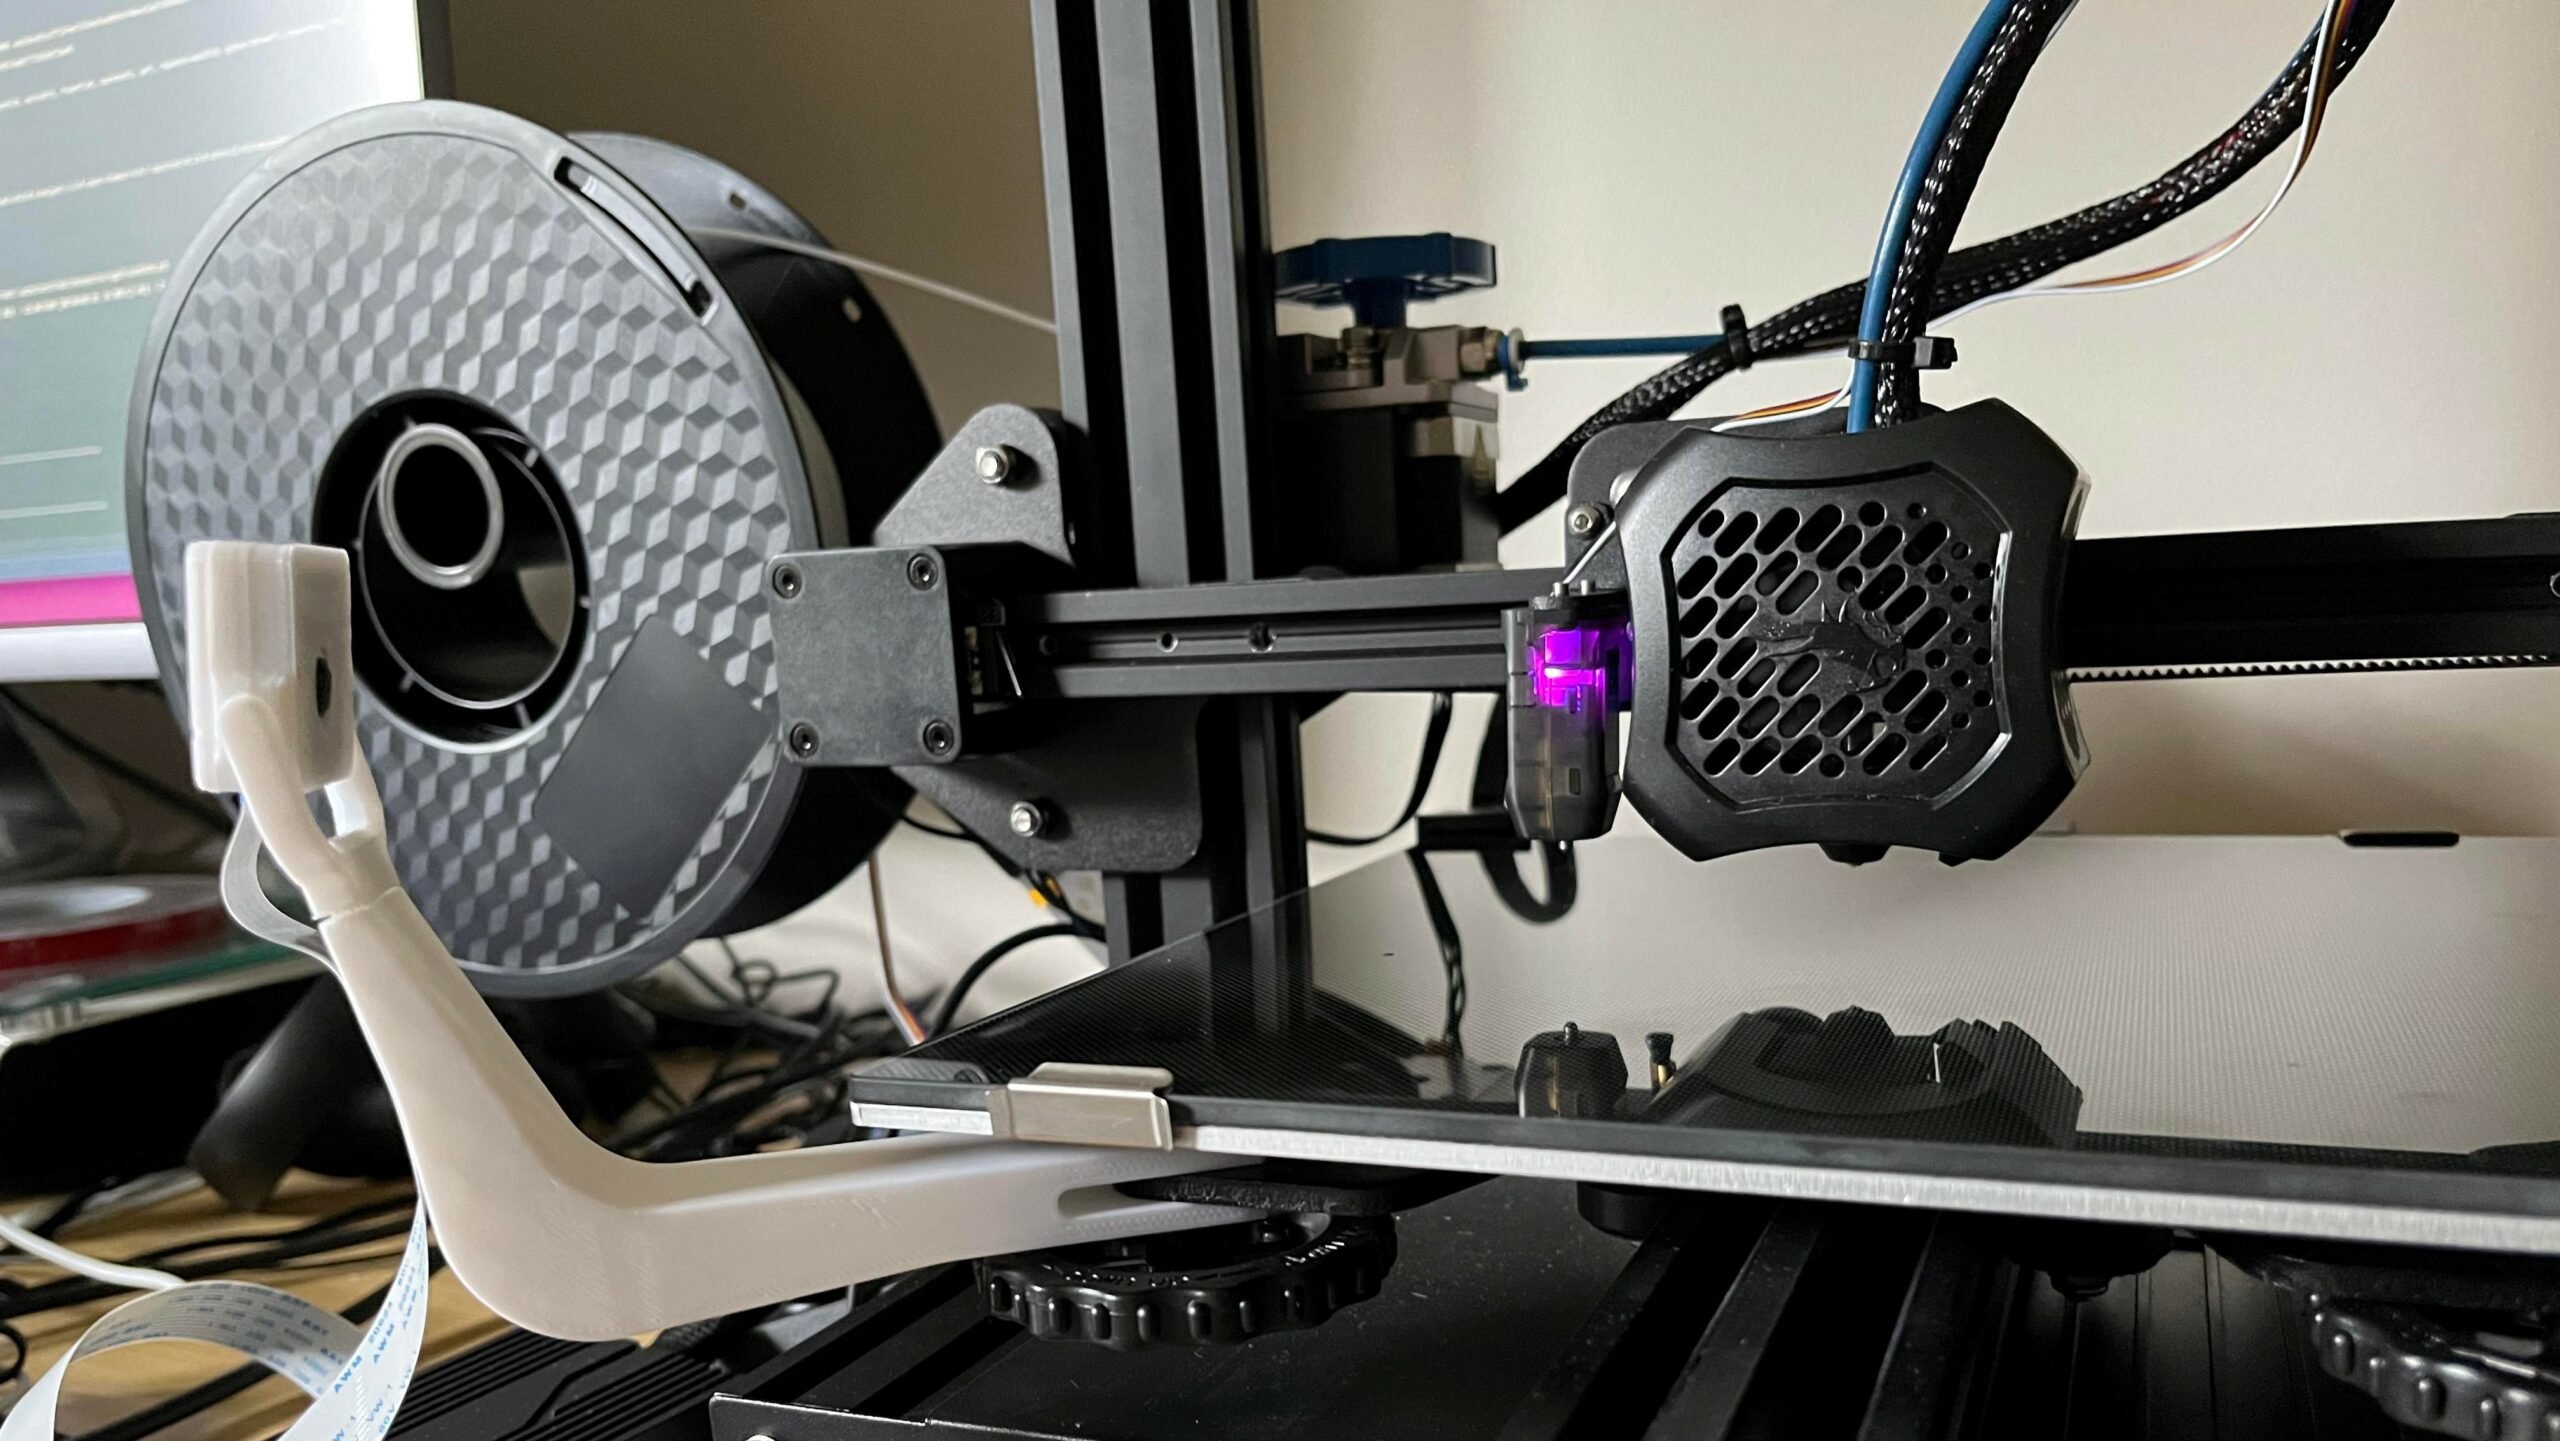 Nest Afwijken Trouw How to Mount a Raspberry Pi Camera on an Ender 3 V2 | All3DP